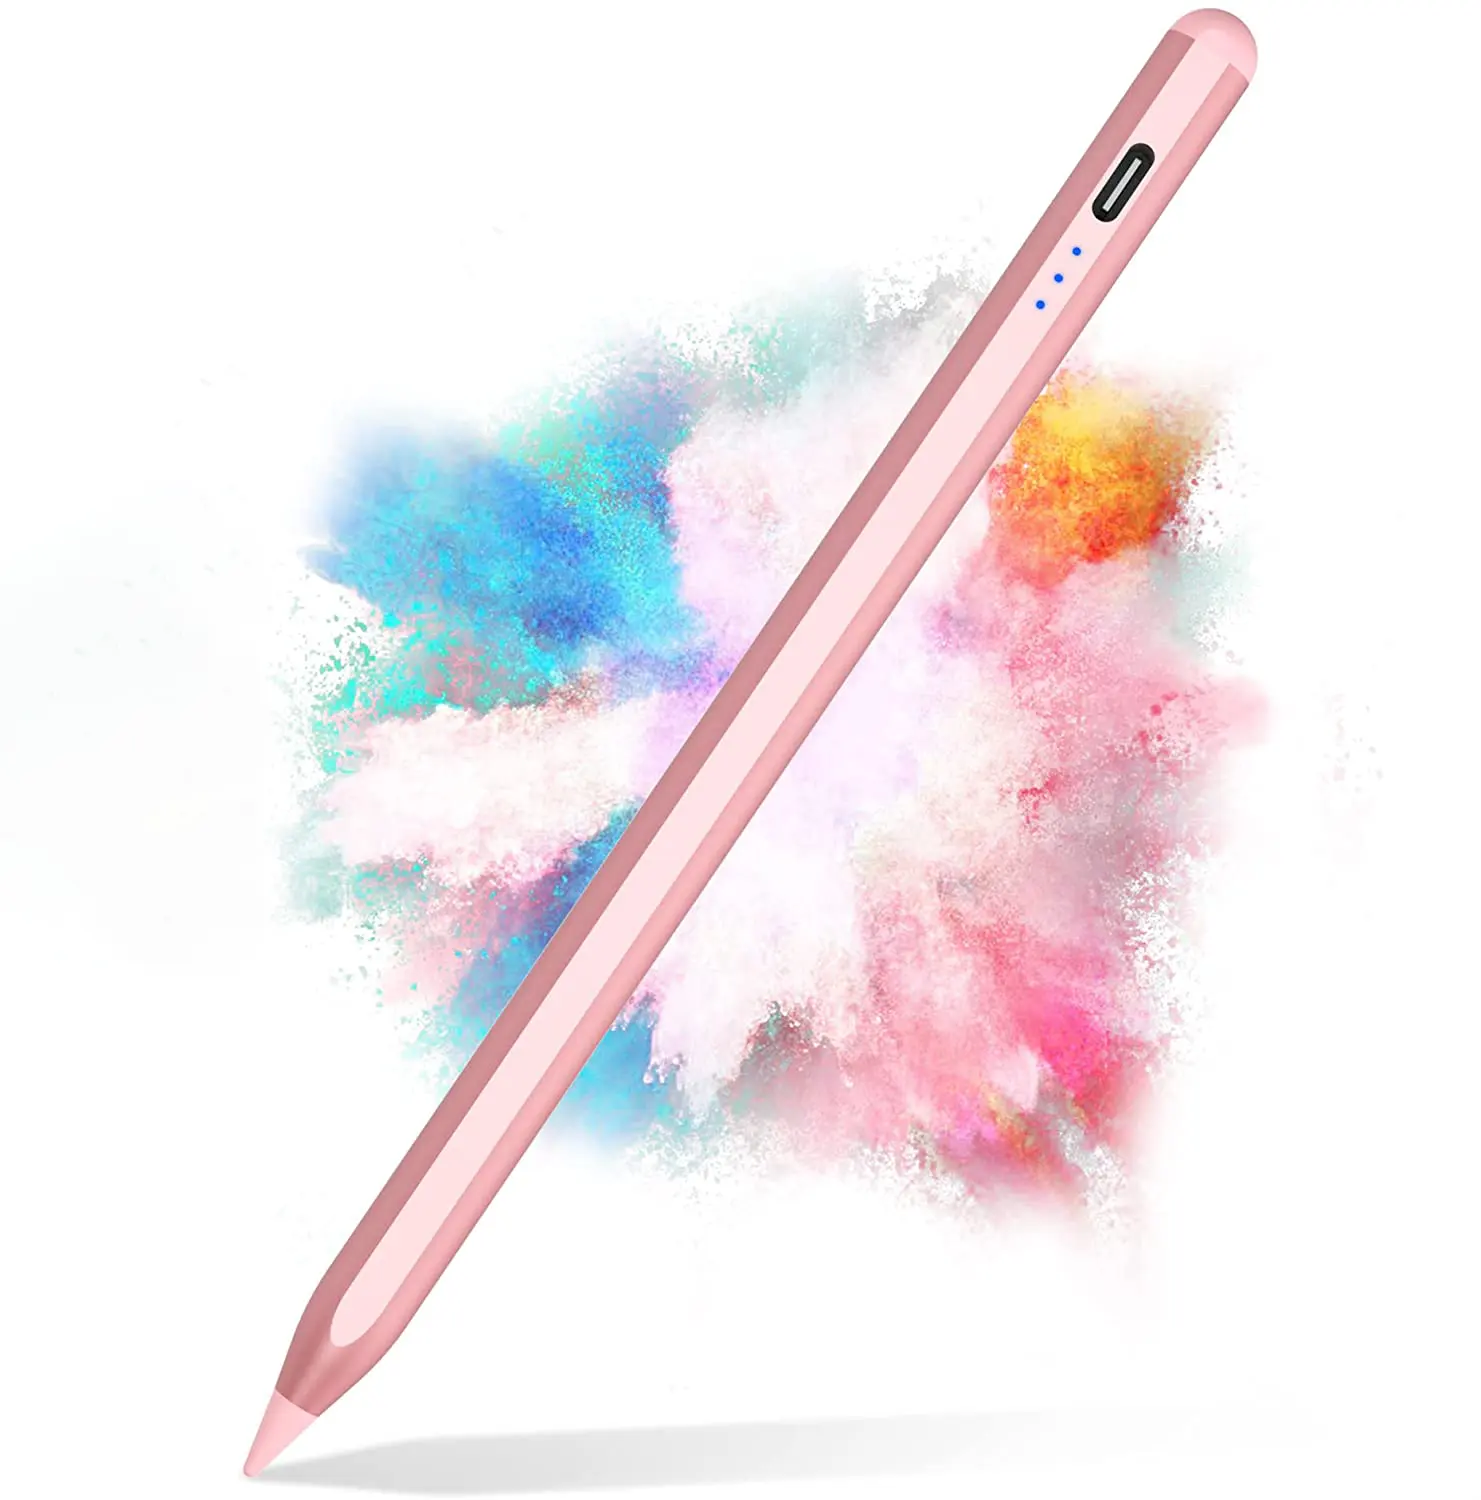 High Performance Aluminum Alloy Touch Screen AI Stylus Pen Pencil iPad Silky Smooth Carbon Neutral Fast Charging Various Tablets